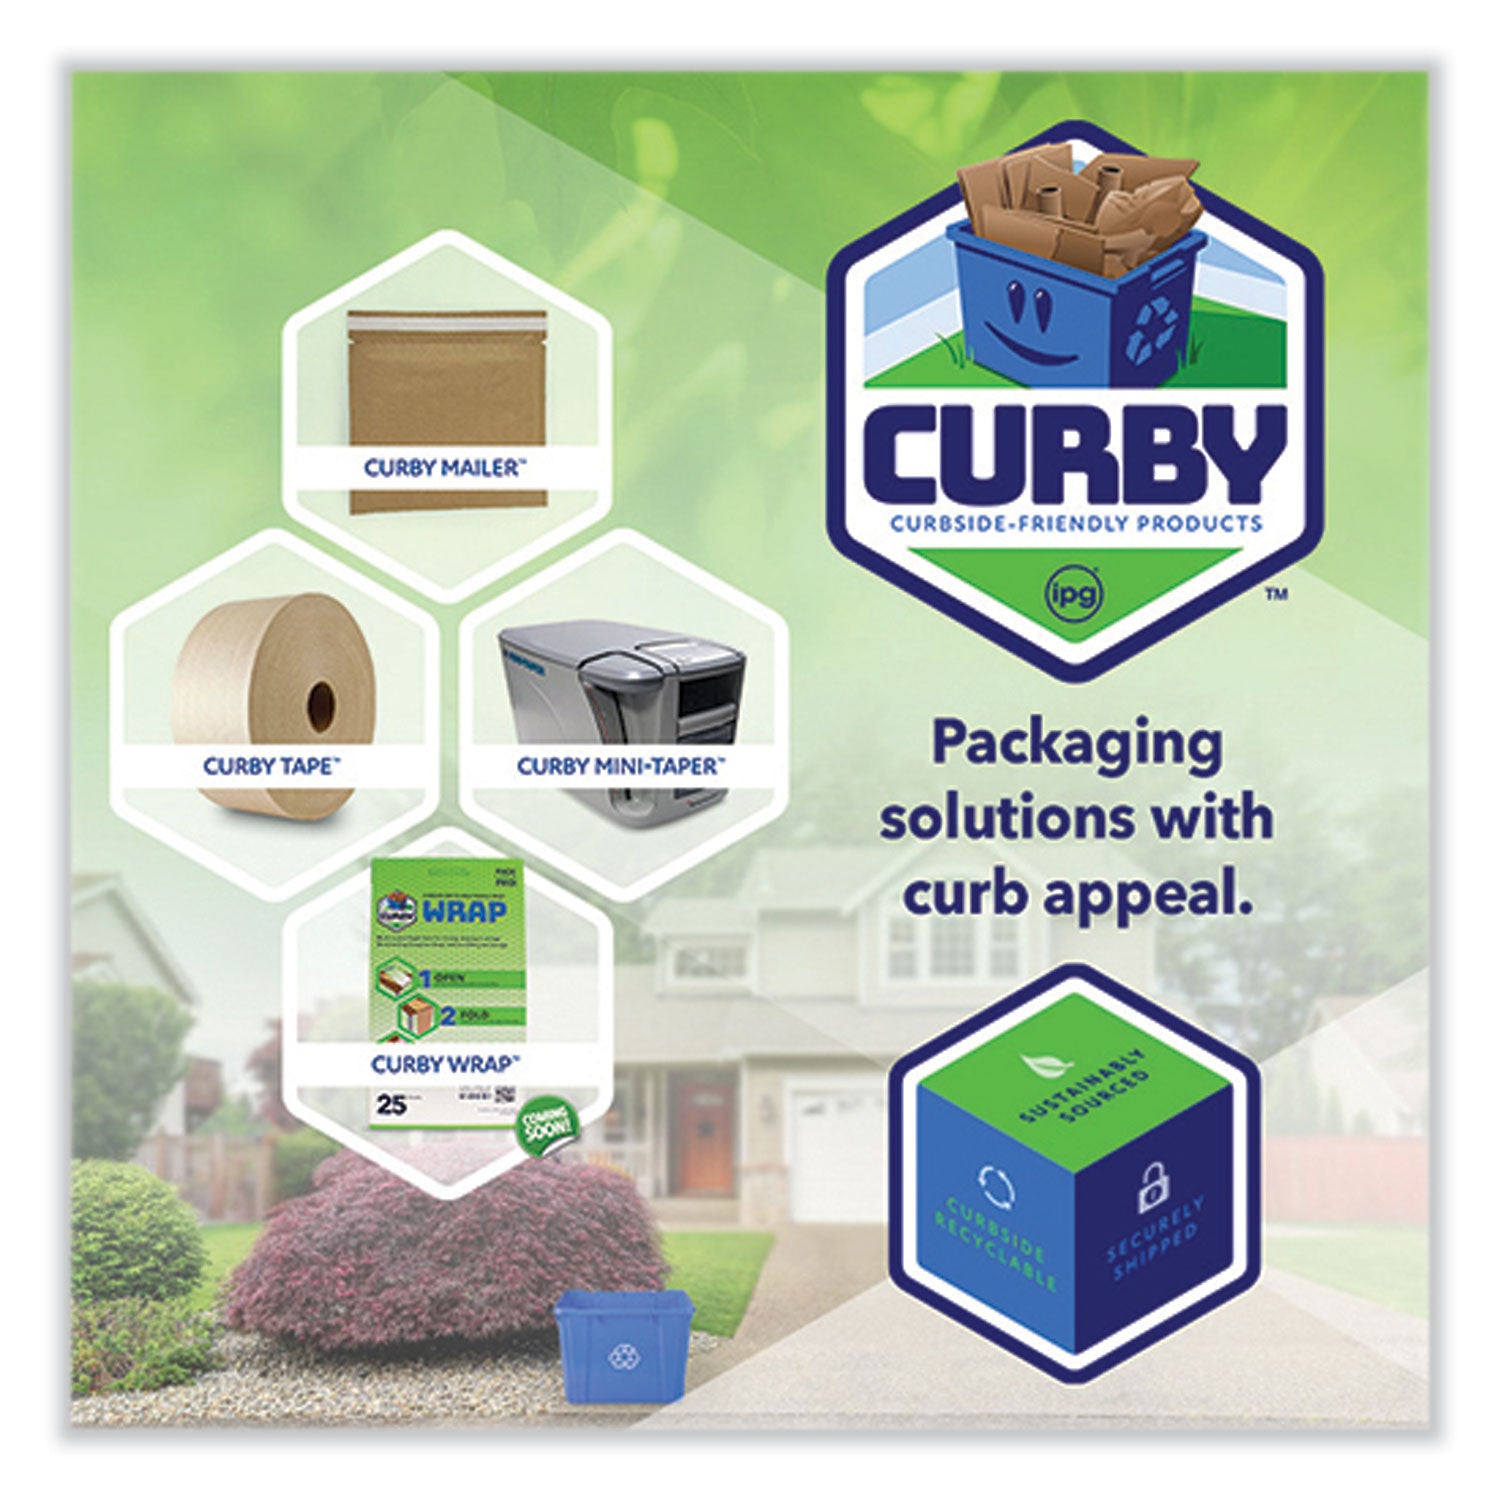 curby-mailer-self-sealing-recyclable-mailer-paper-padding-self-adhesive-#2-1138-x-95-30-carton_ipgcbml2c - 3